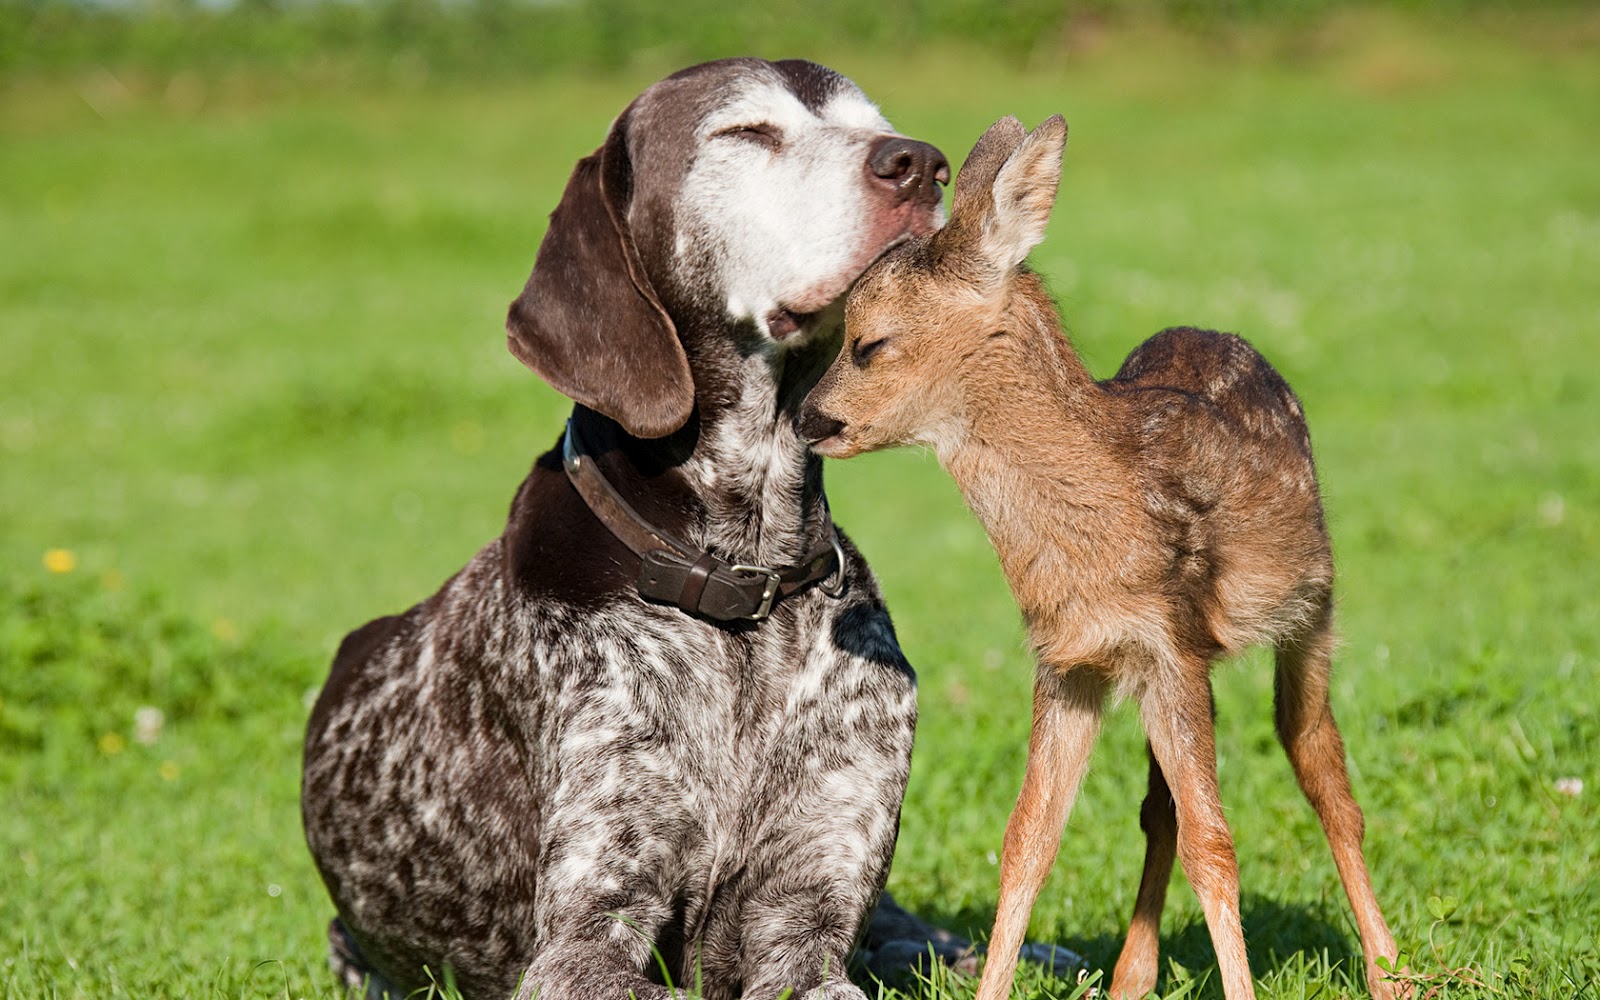 And Baby Deer Animals Friendship HD Wallpaper Nature